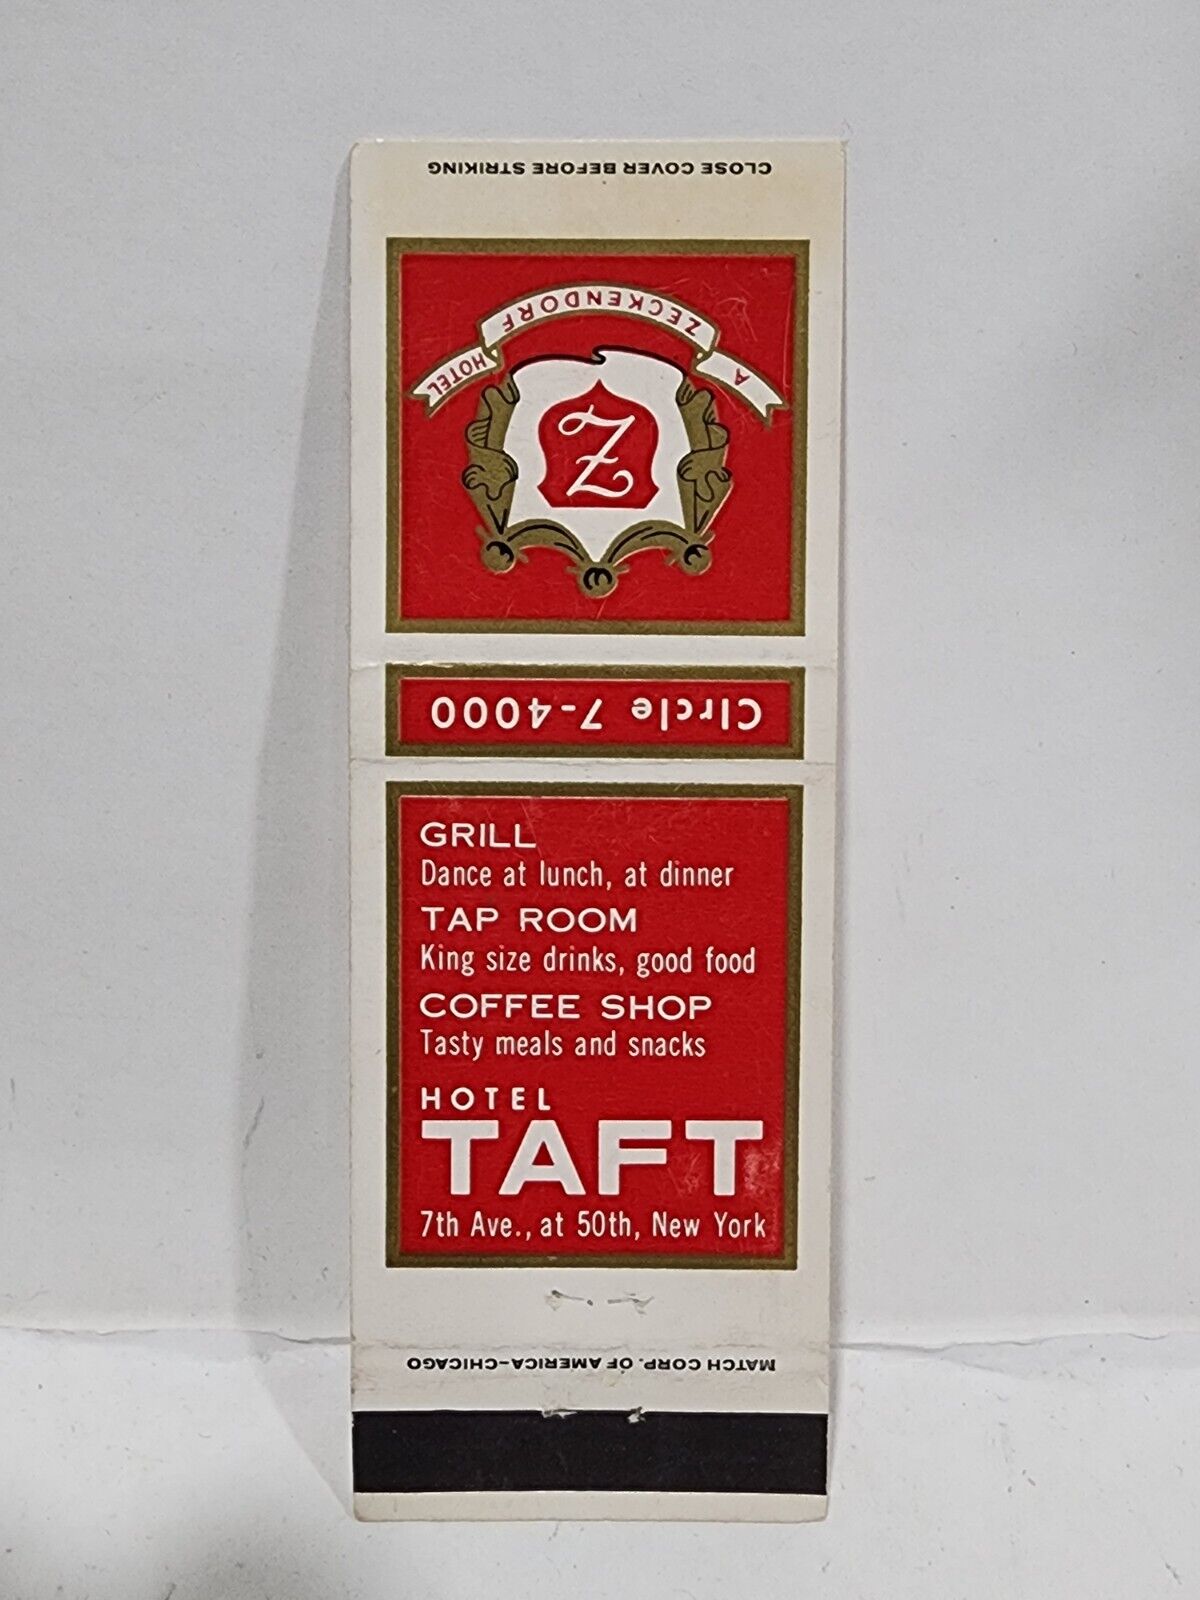 Vintage Matchbook Cover - HOTEL TAFT A Zeckendorf Hotel New York NY Match Corp.